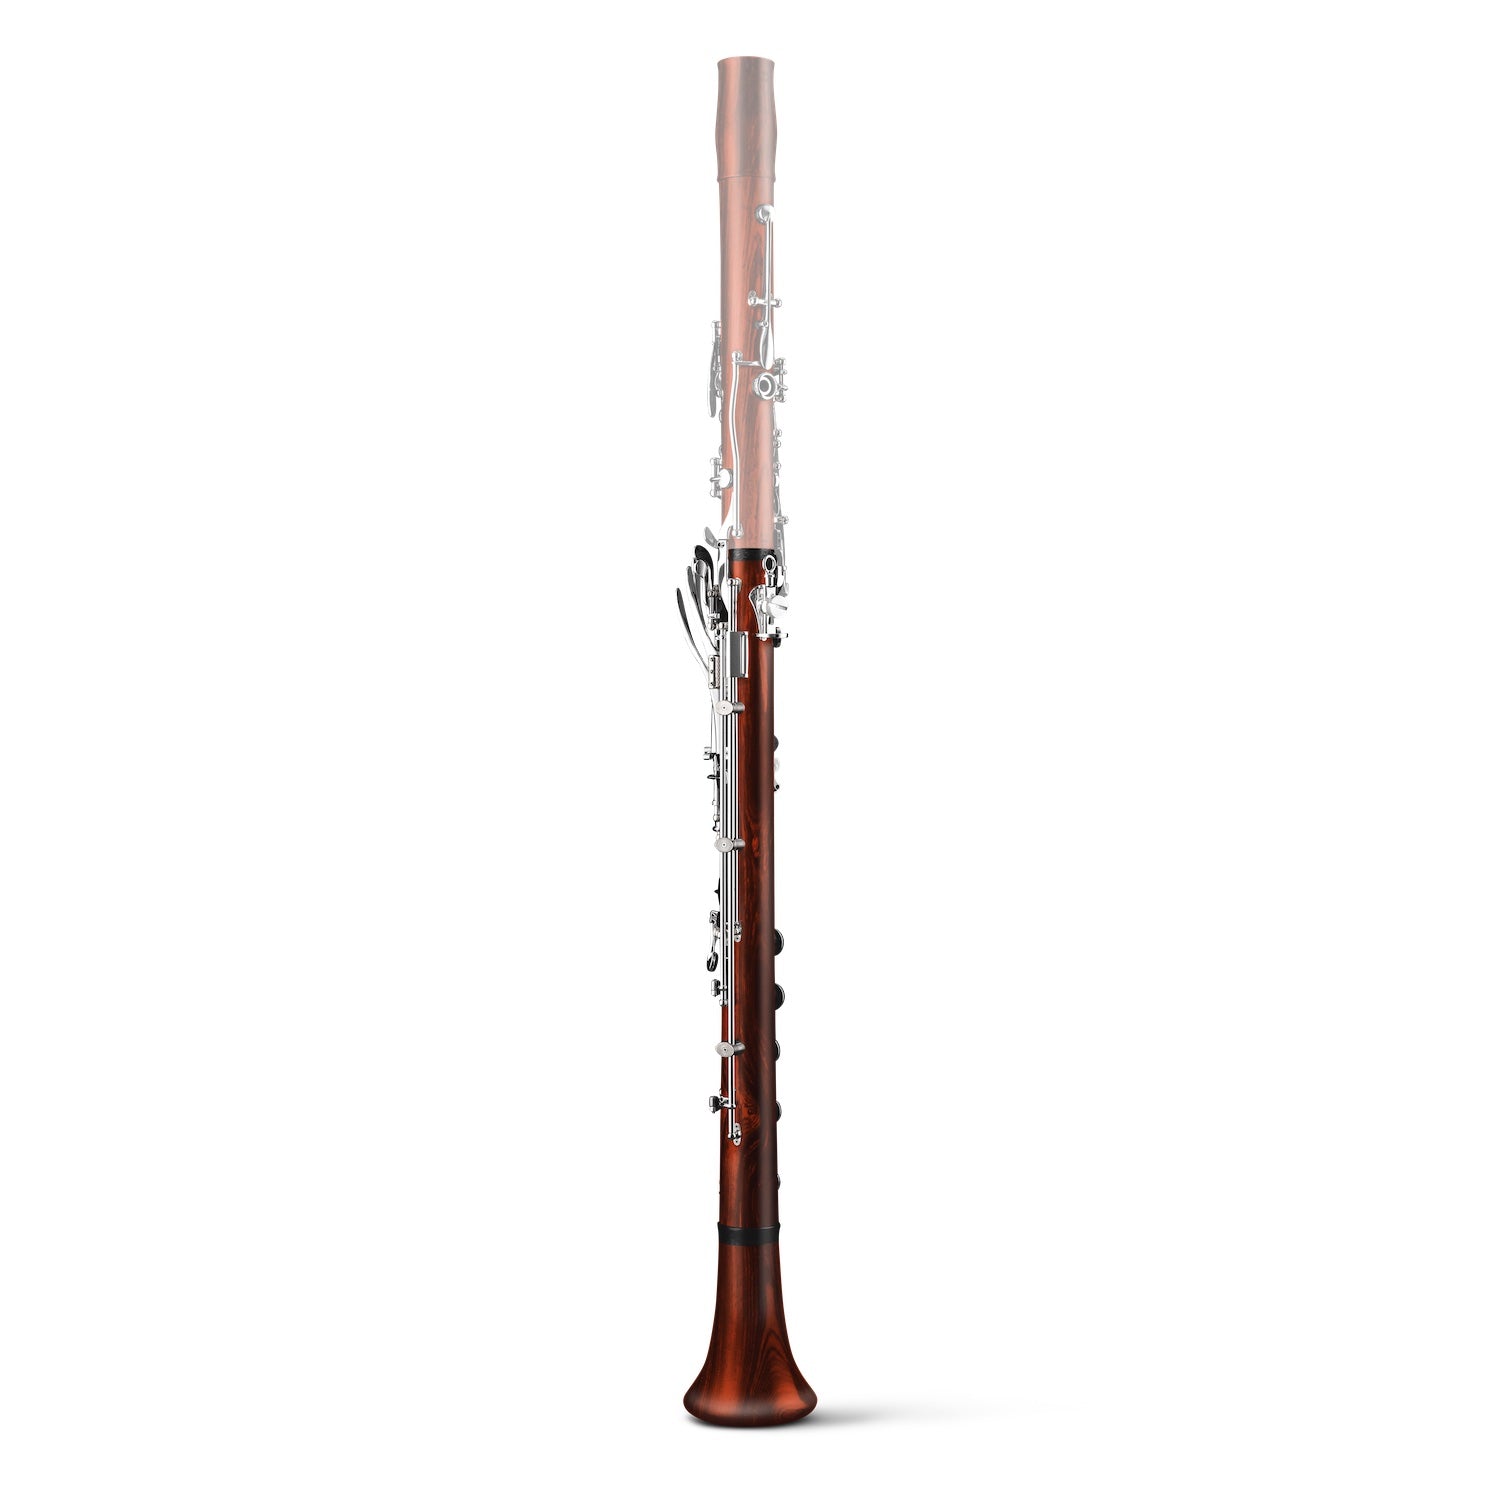 backun-lumiere-a-basset-clarinet-lower-joint-cocobolo-silver-back